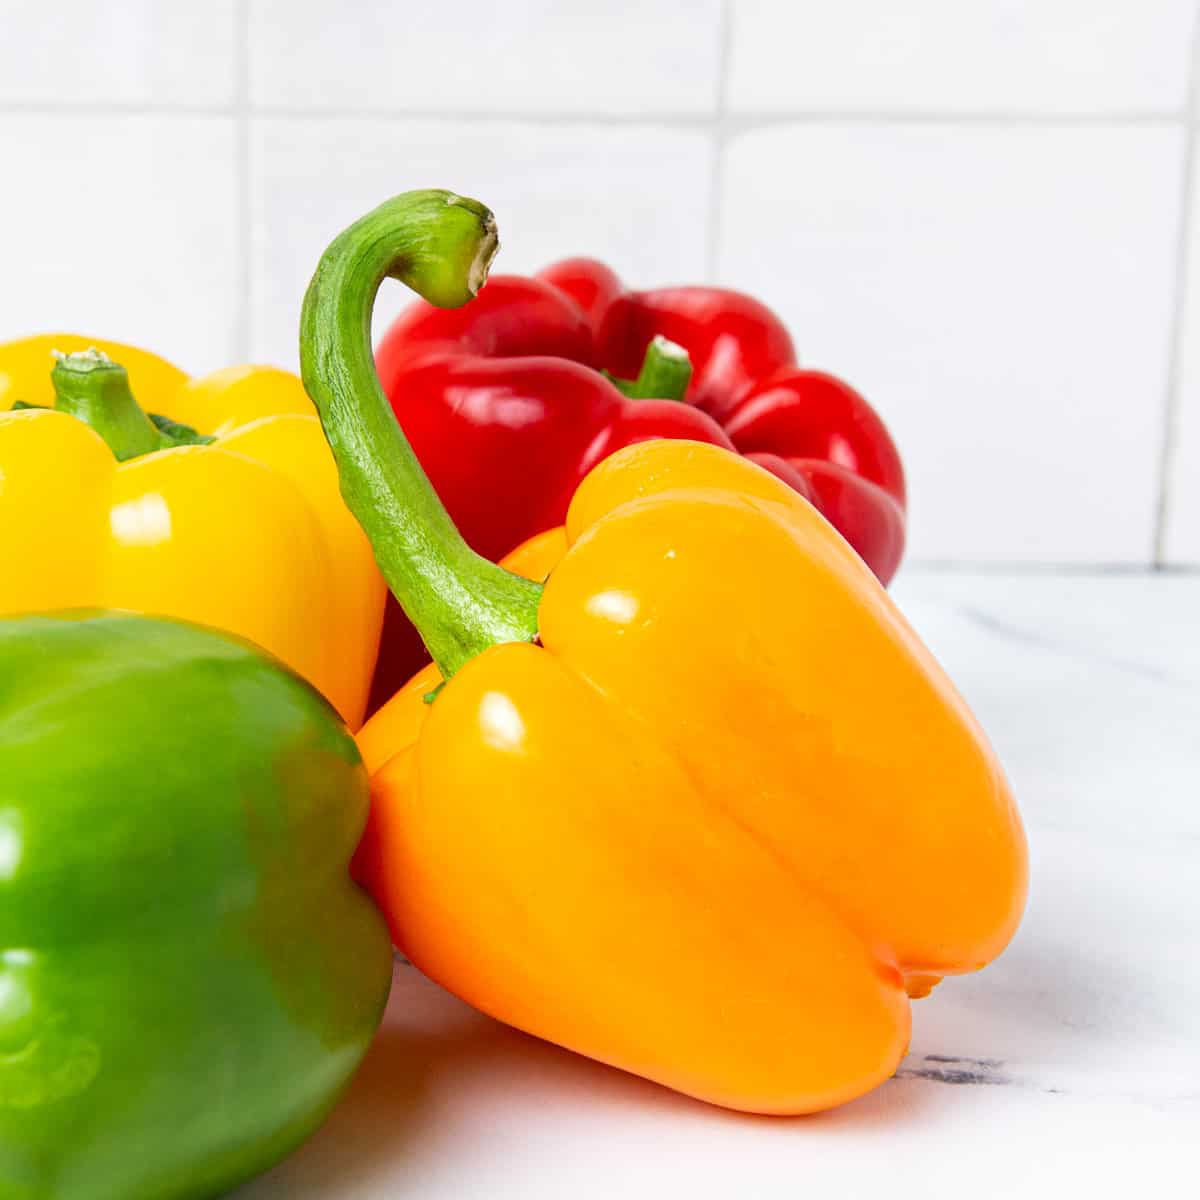 Bell peppers on a kitchen counter.